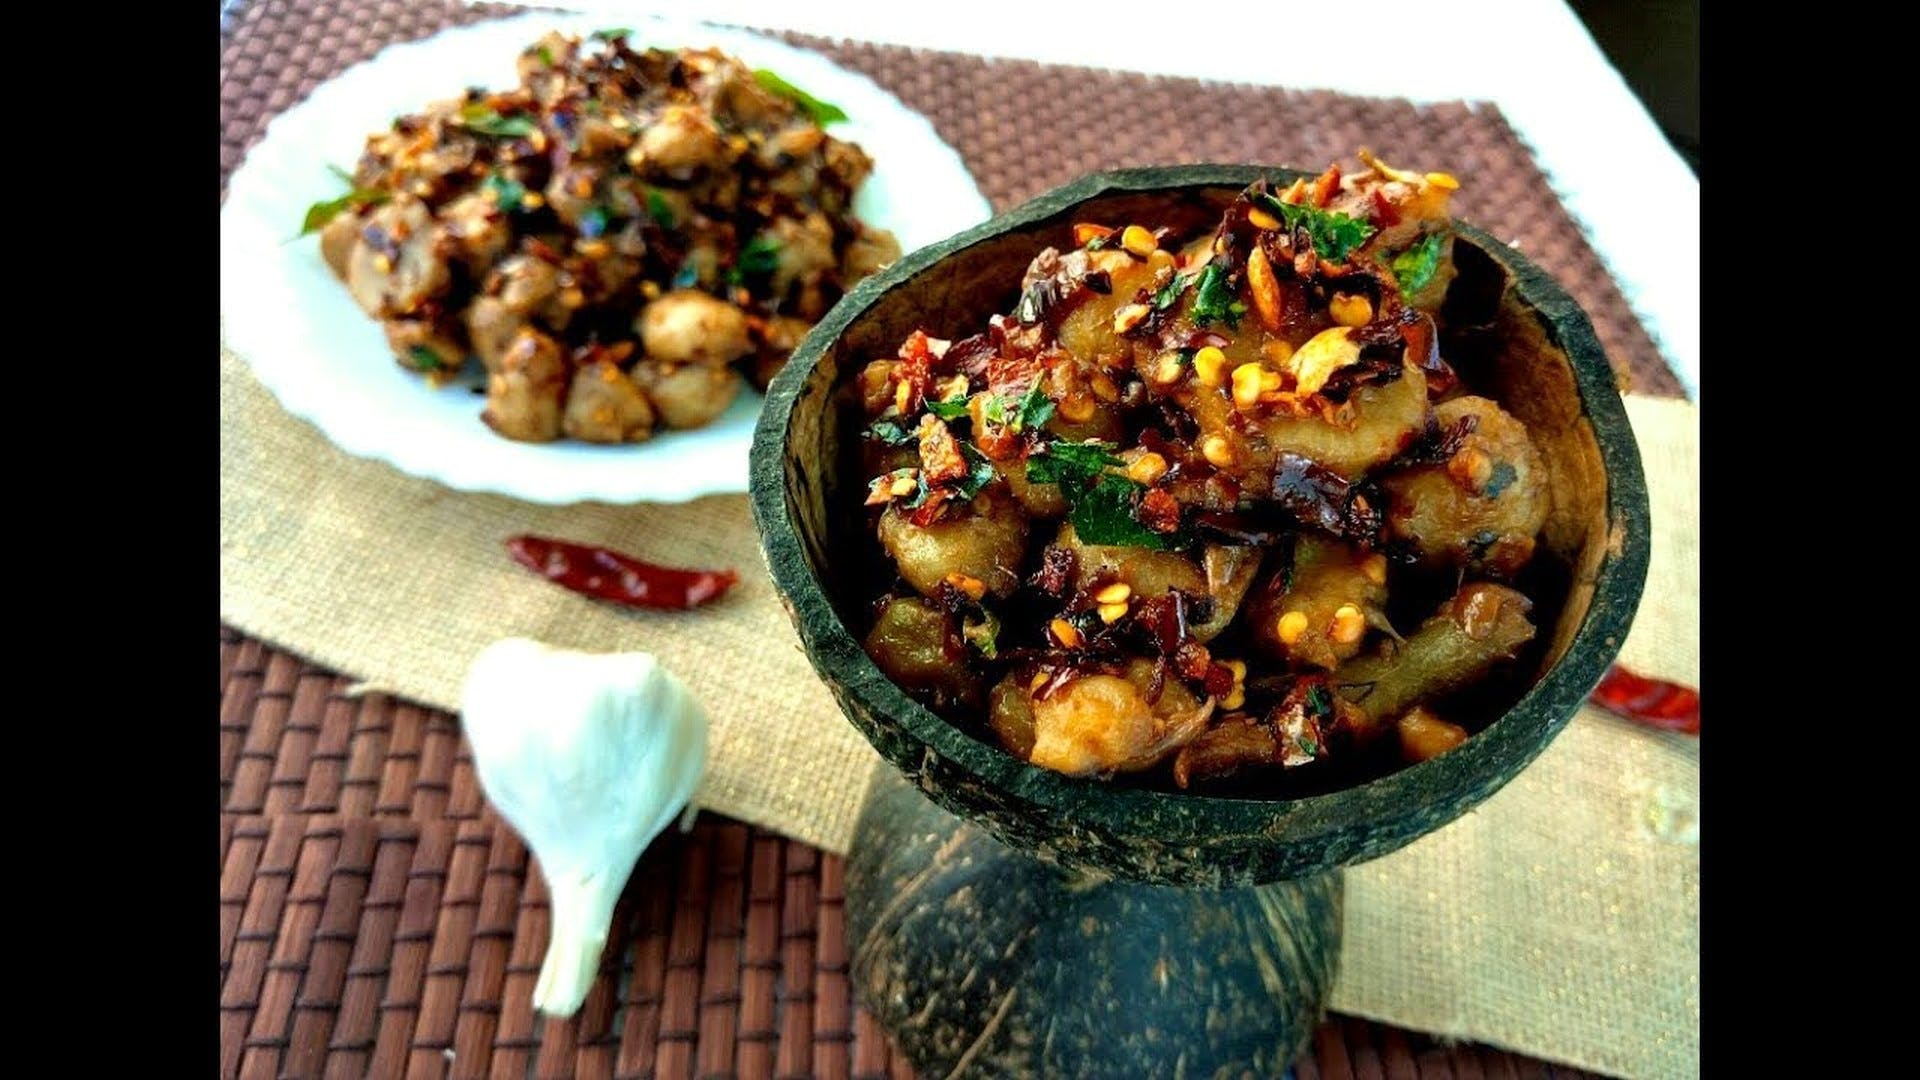 Dish,Food,Cuisine,Ingredient,Produce,Recipe,Caponata,Vegetarian food,Kung pao chicken,Meat